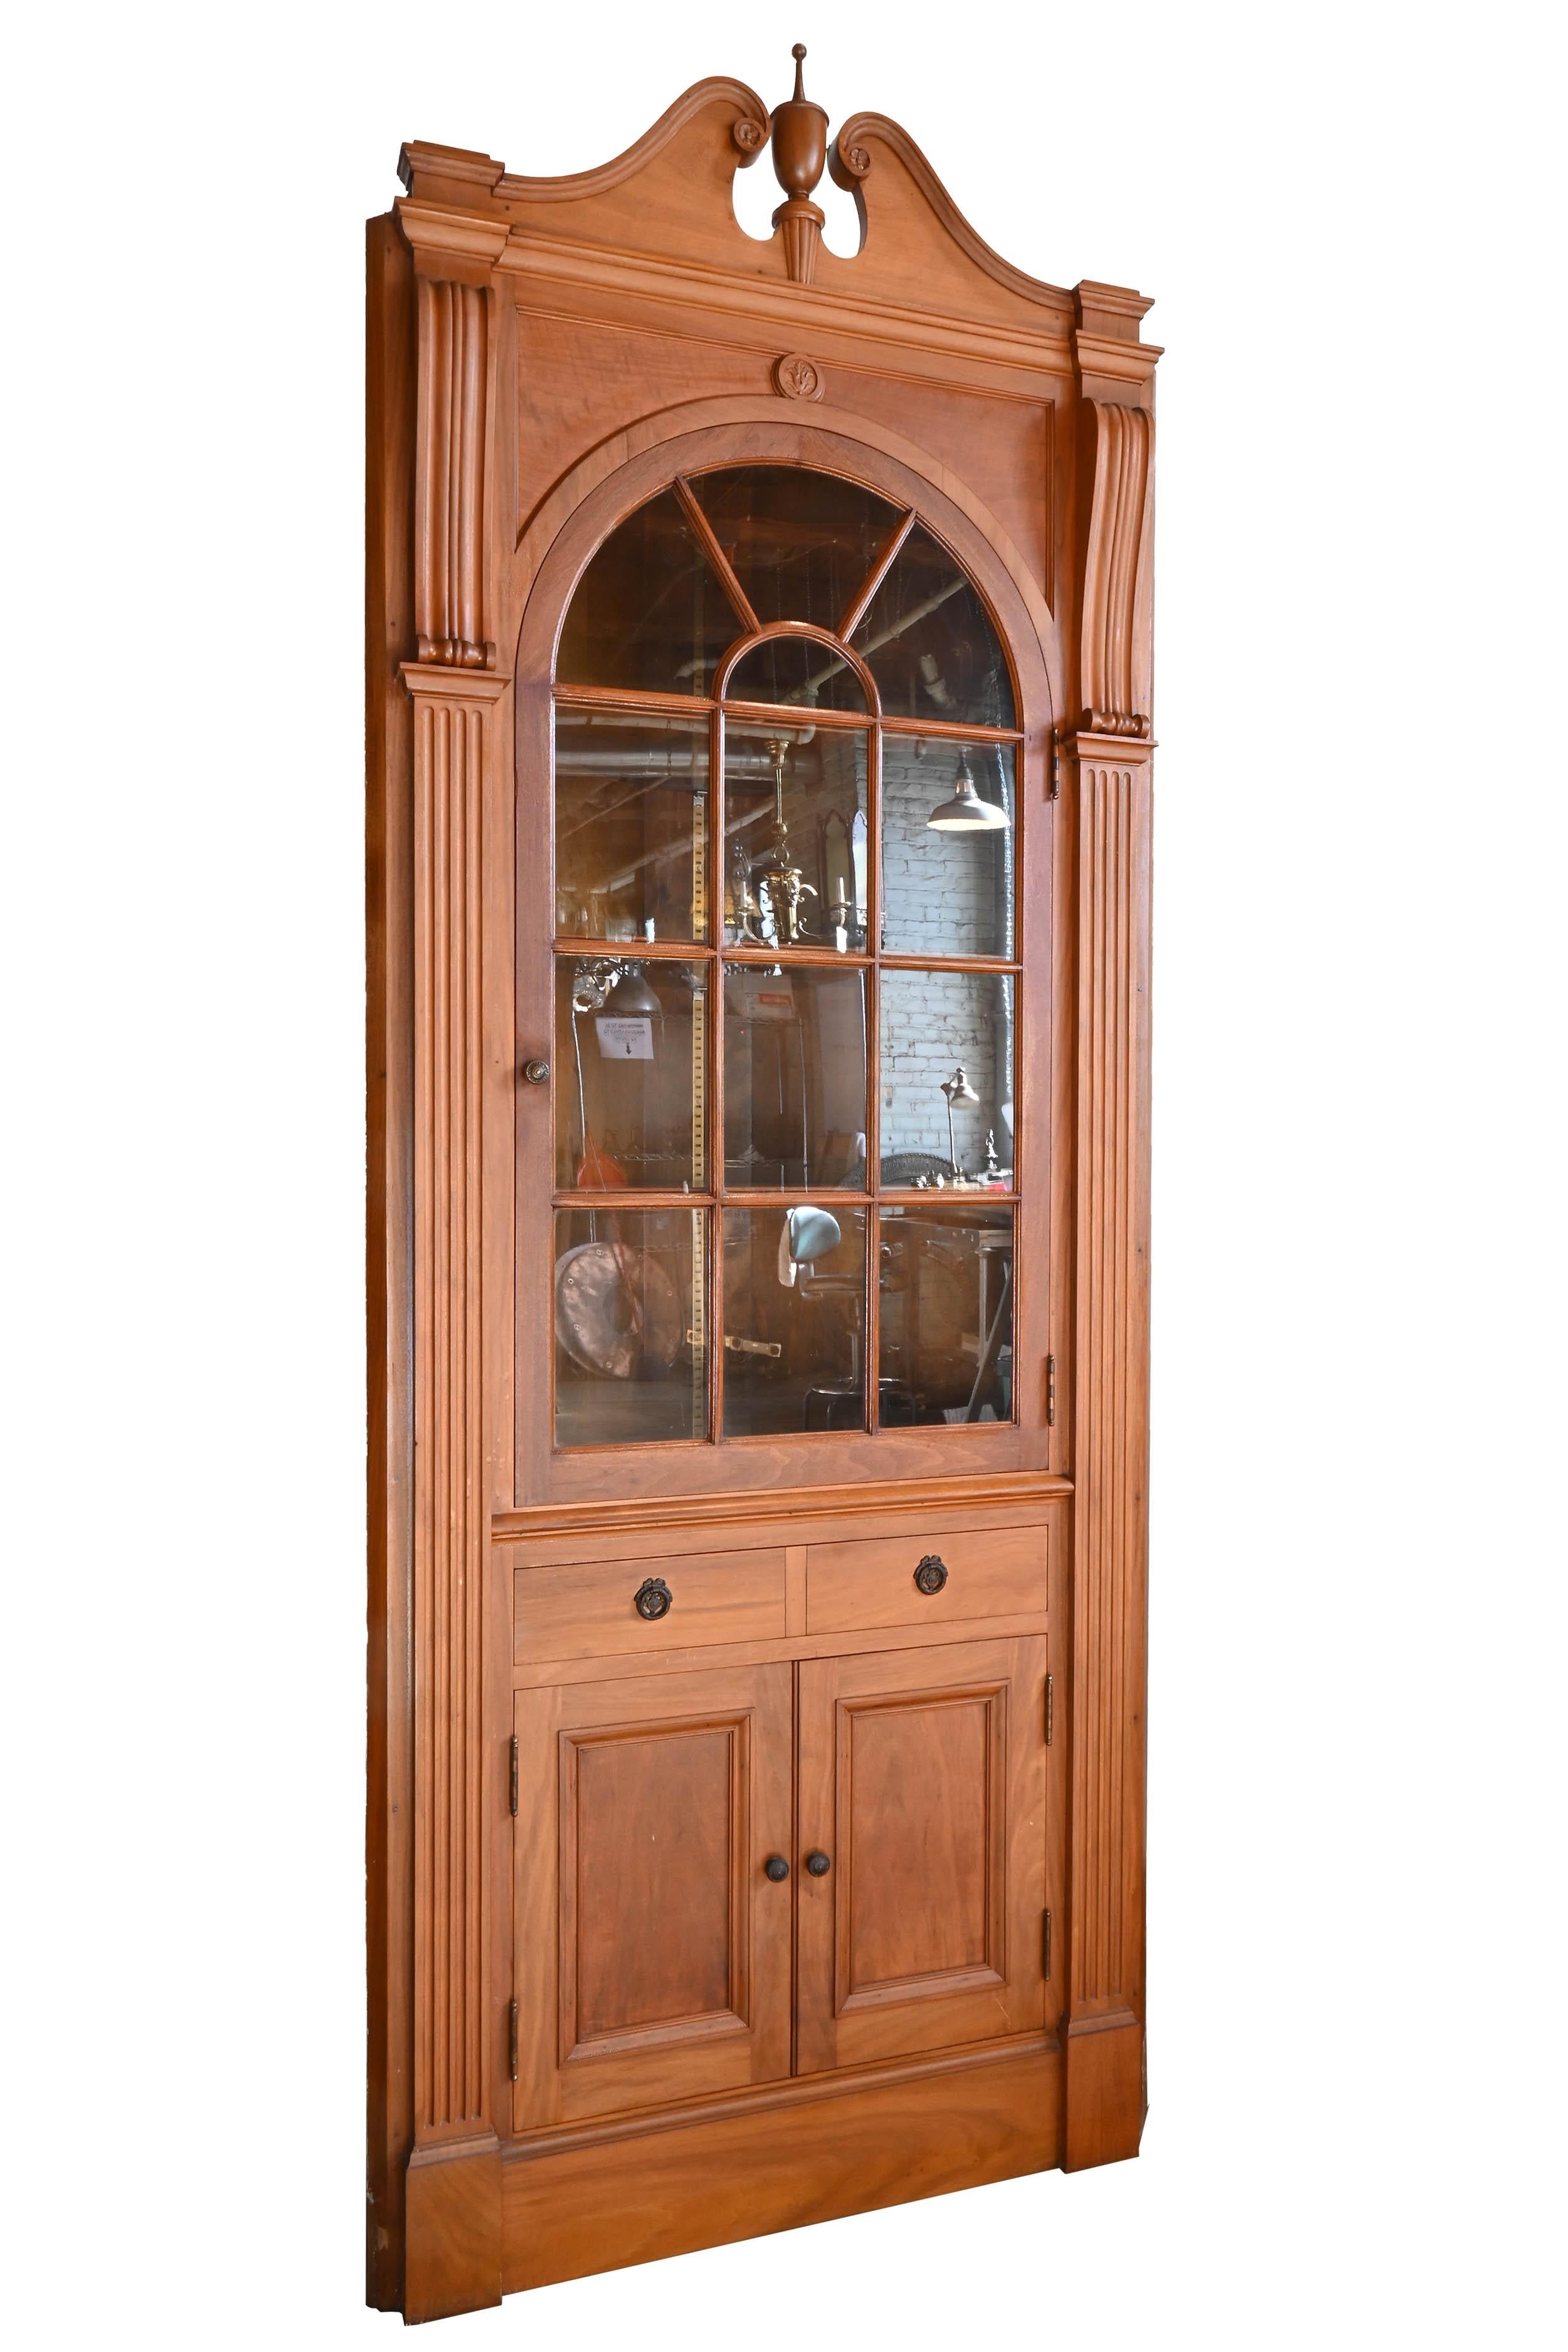 A pair available, priced separately.

This matching pair of solid walnut corner cabinets with their hand carved detailing along with a walnut mantel and others pieces like rounded room dividers, paneled doors, etc. all salvaged by our team from a